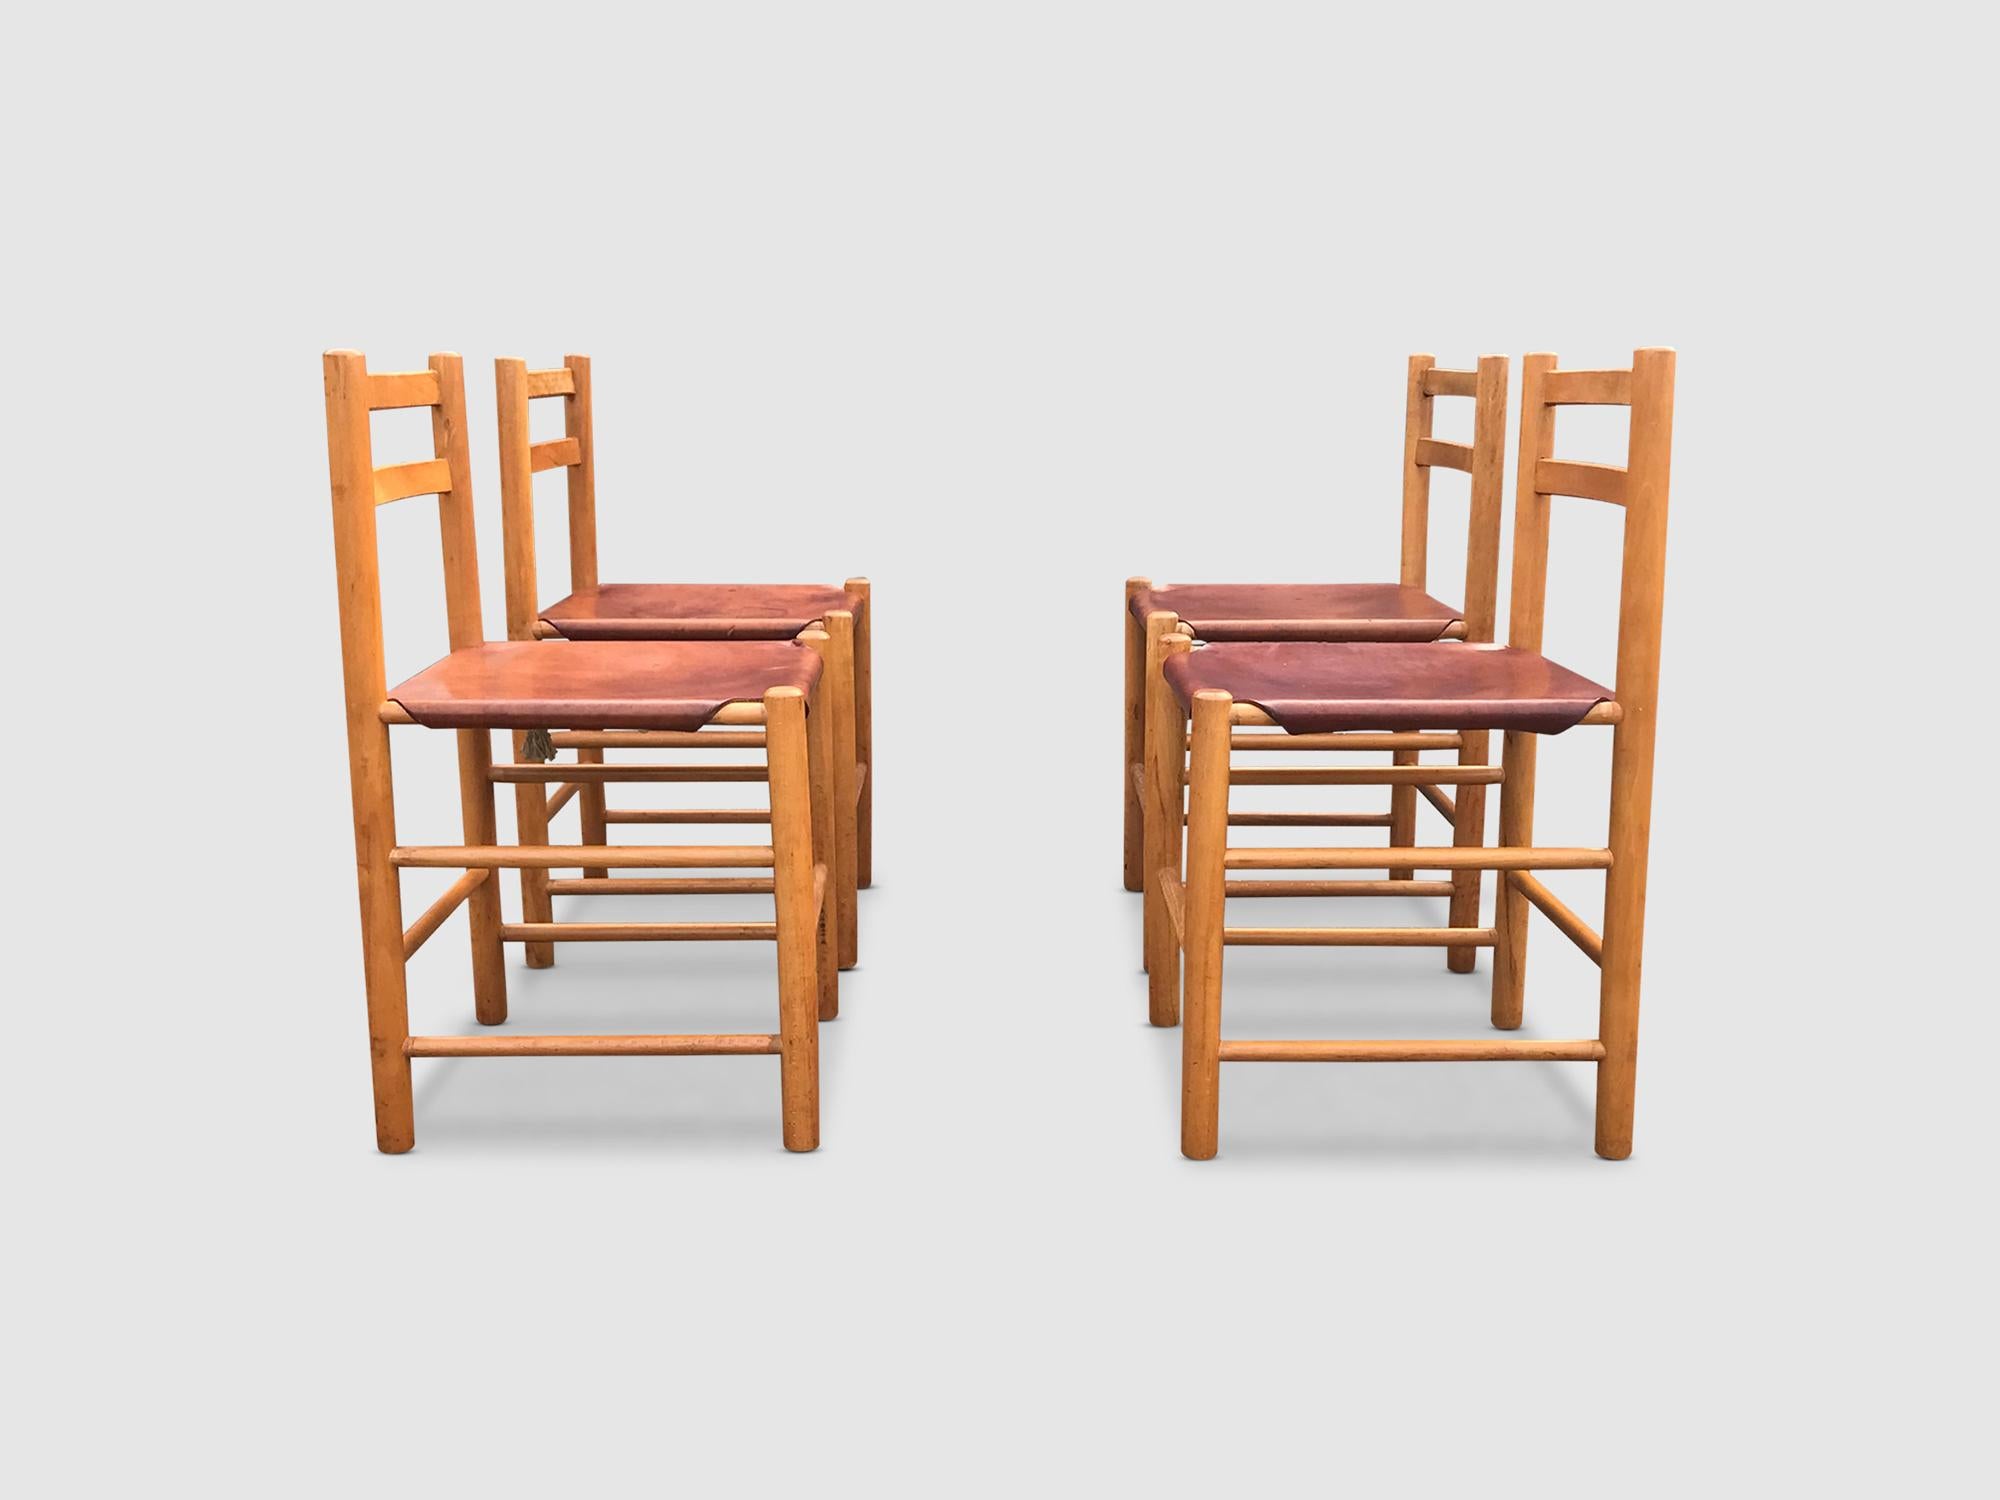 Set of sleek and sober yet very well crafted dining chairs in elm wood by Ate van Apeldoorn for Houtwerk Hattem.

The chairs feature a very square elm frame with round shaped feet and a double slatted backrest. The seat is made out of a cut to